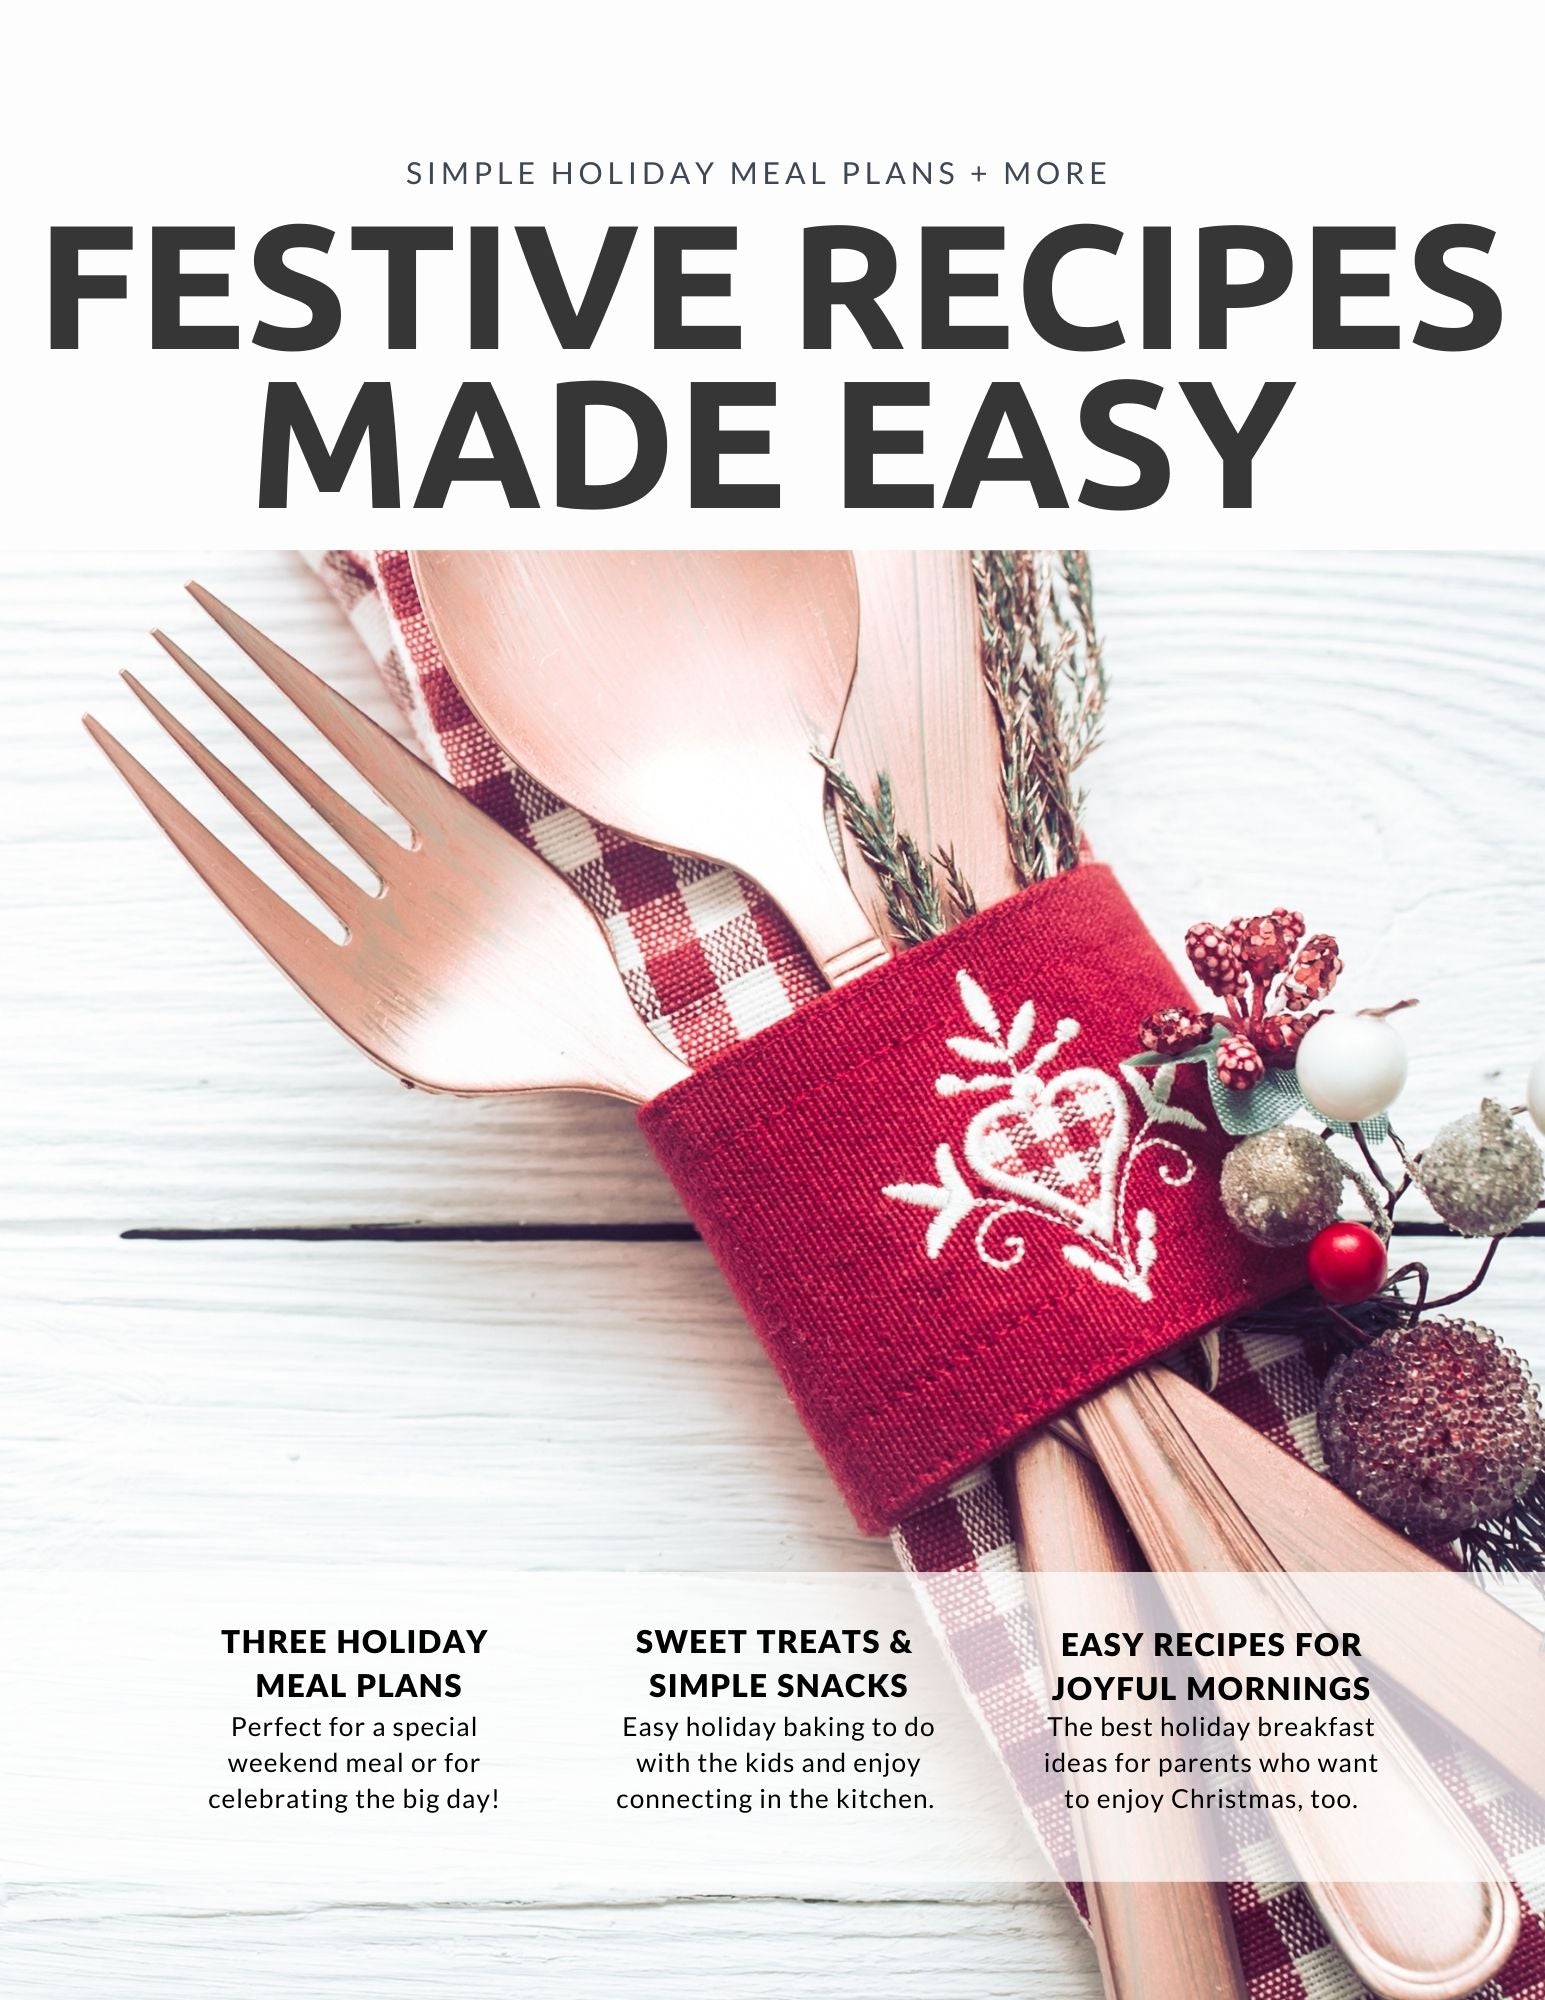 Create a holiday cookbook for your favorite family recipes!